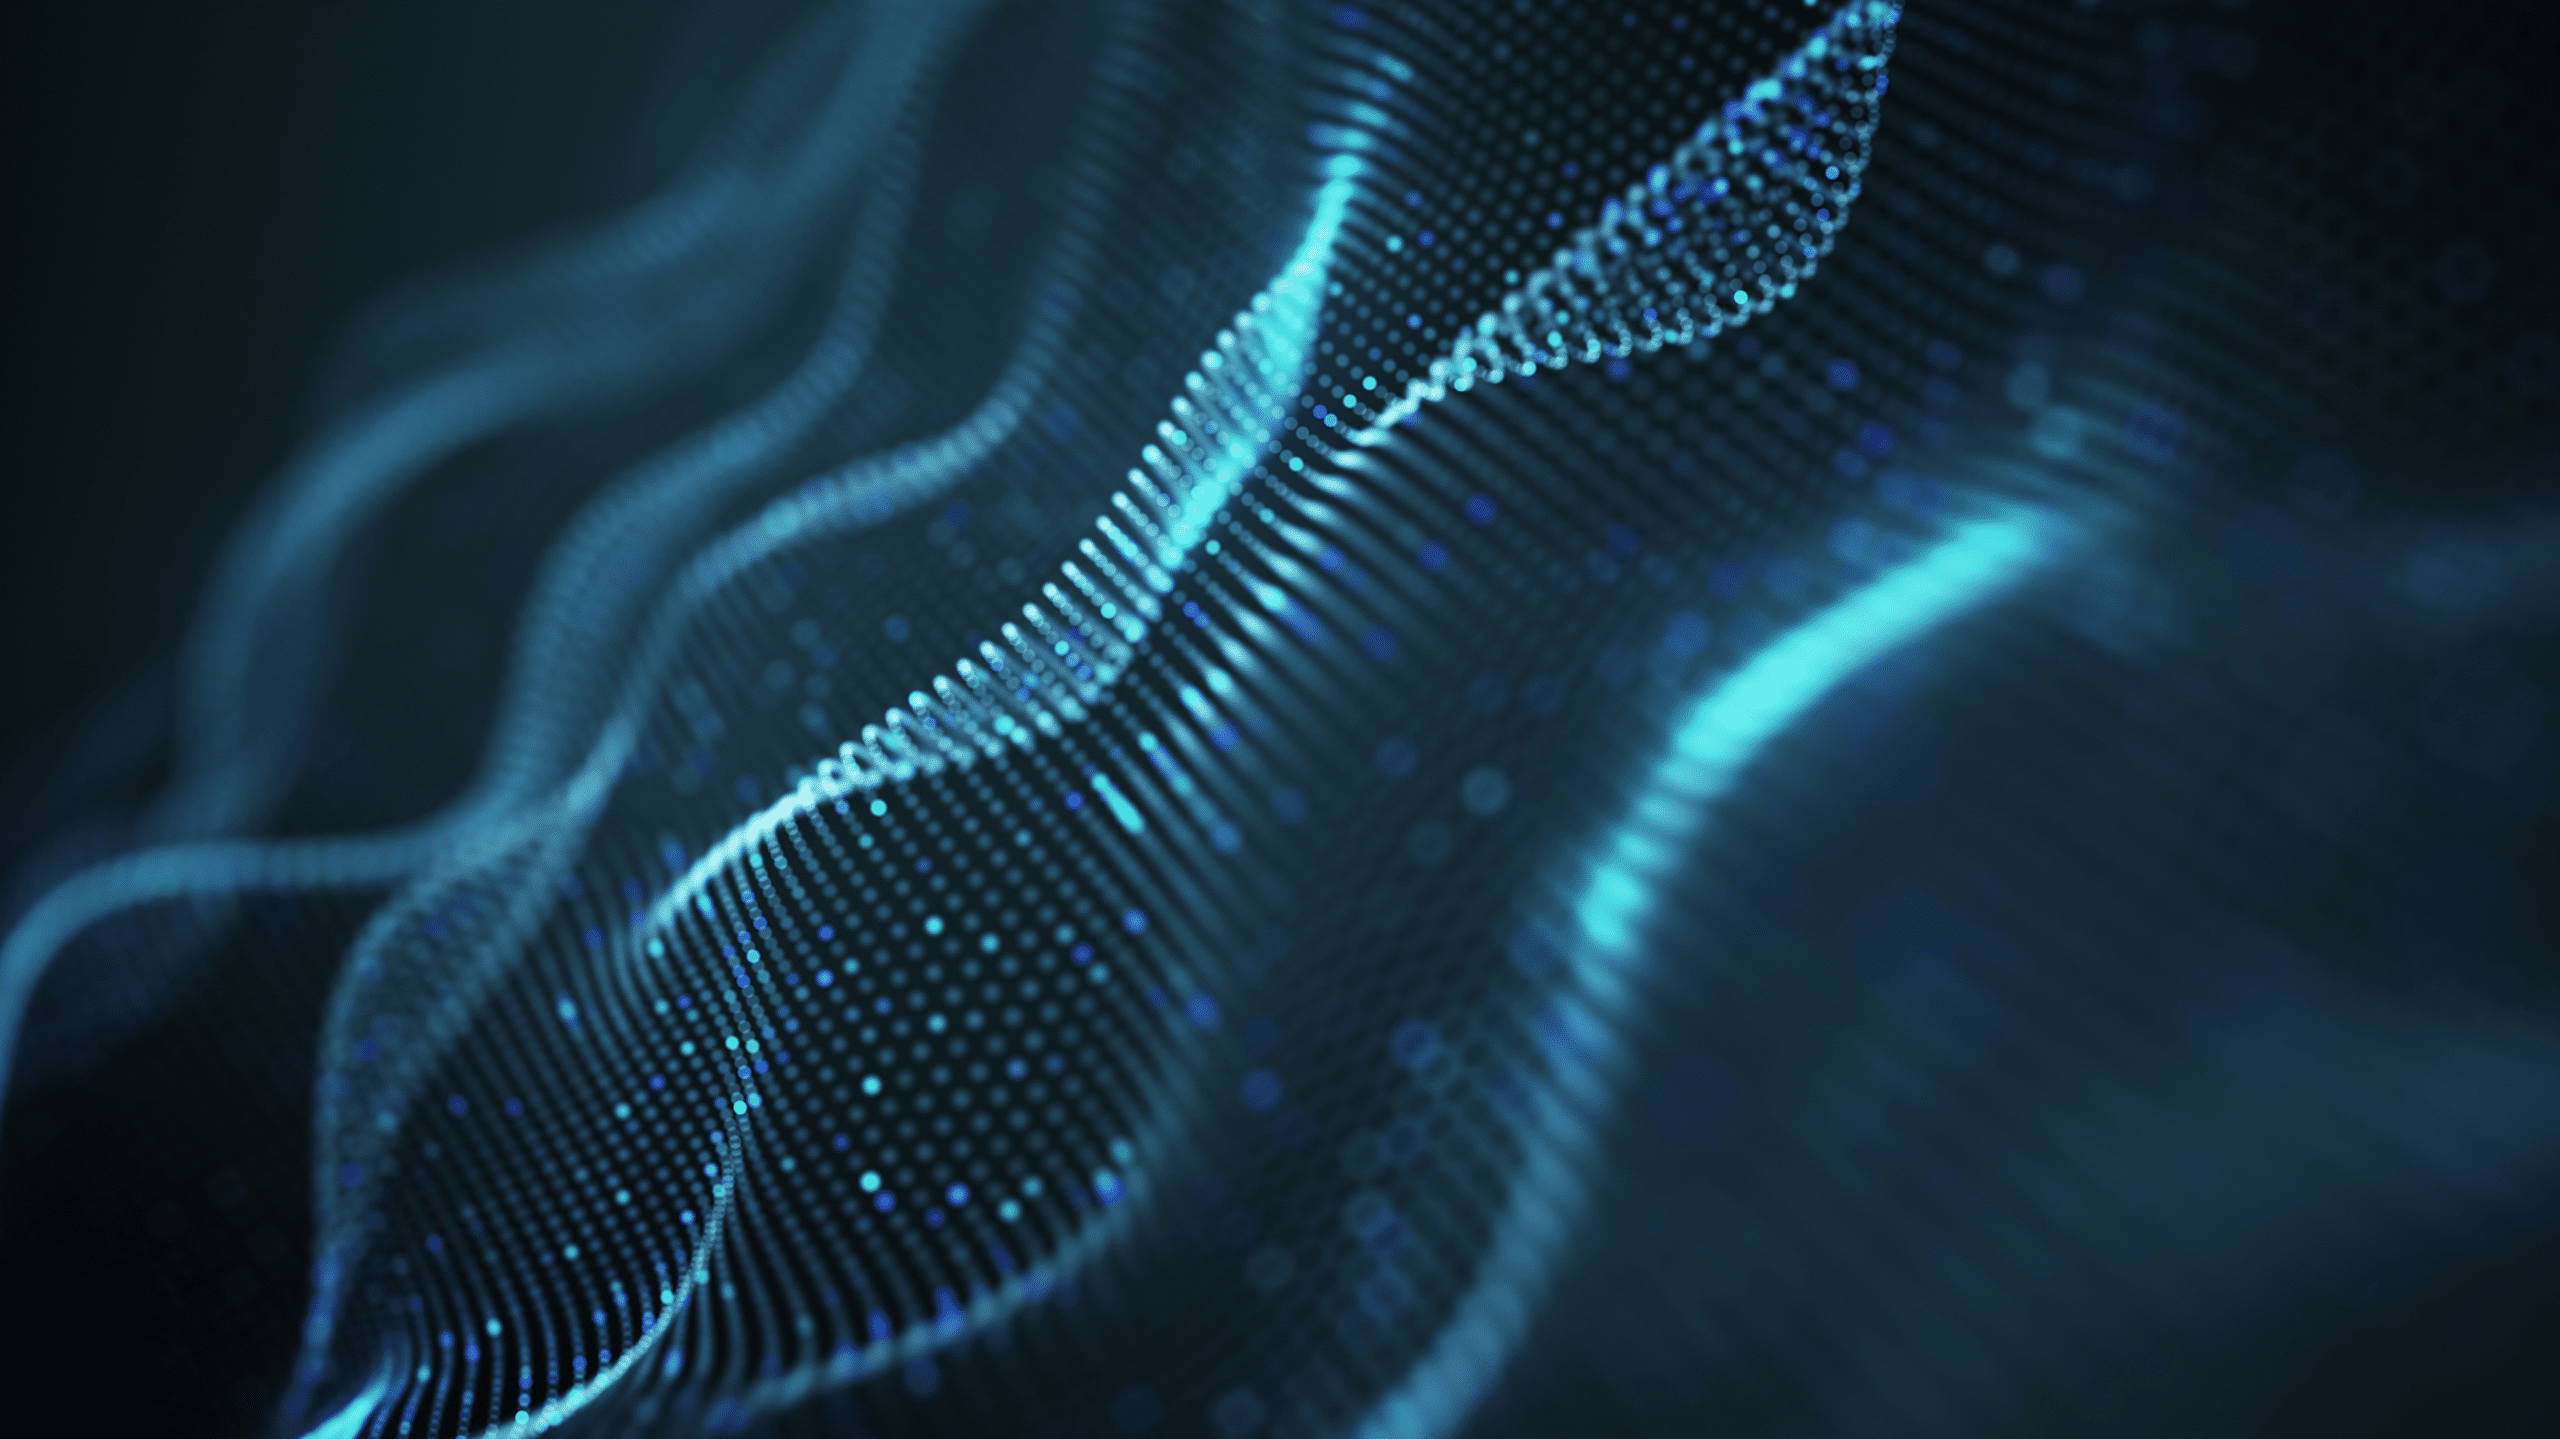 Abstract image of flowing blue wavy lines formed by connected glowing dots, illustrating the economic benefits of DomainTools Internet Intelligence in a dynamic digital network or data flow on a dark background.